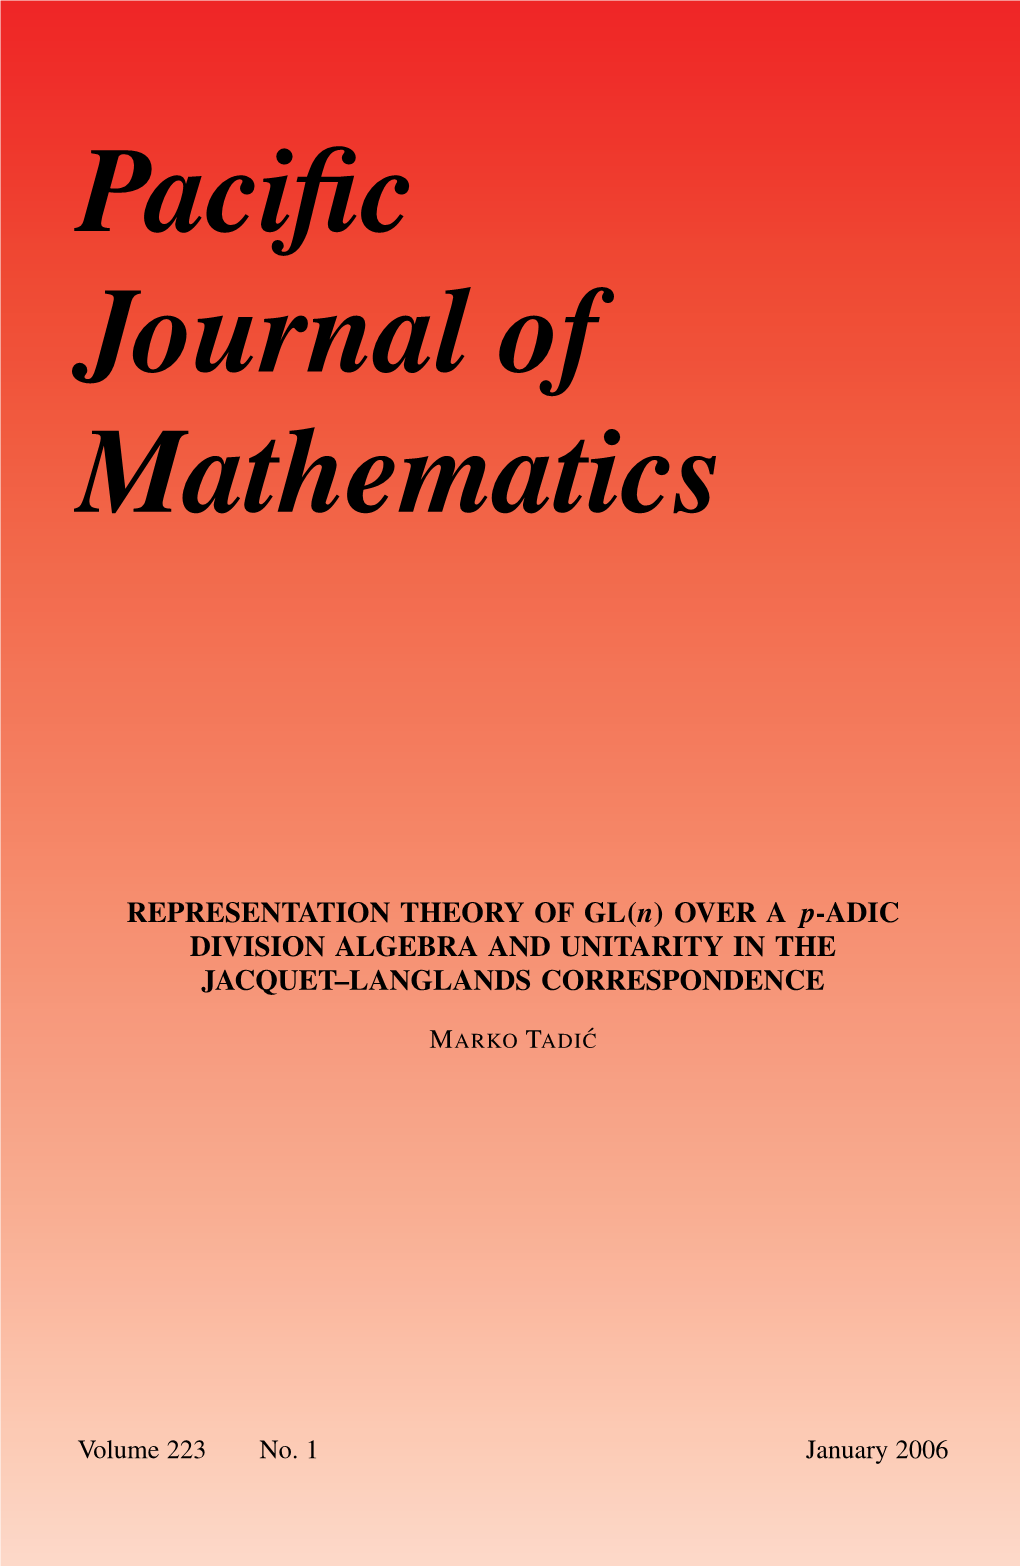 REPRESENTATION THEORY of GL(N) OVER a P-ADIC DIVISION ALGEBRA and UNITARITY in the JACQUET–LANGLANDS CORRESPONDENCE